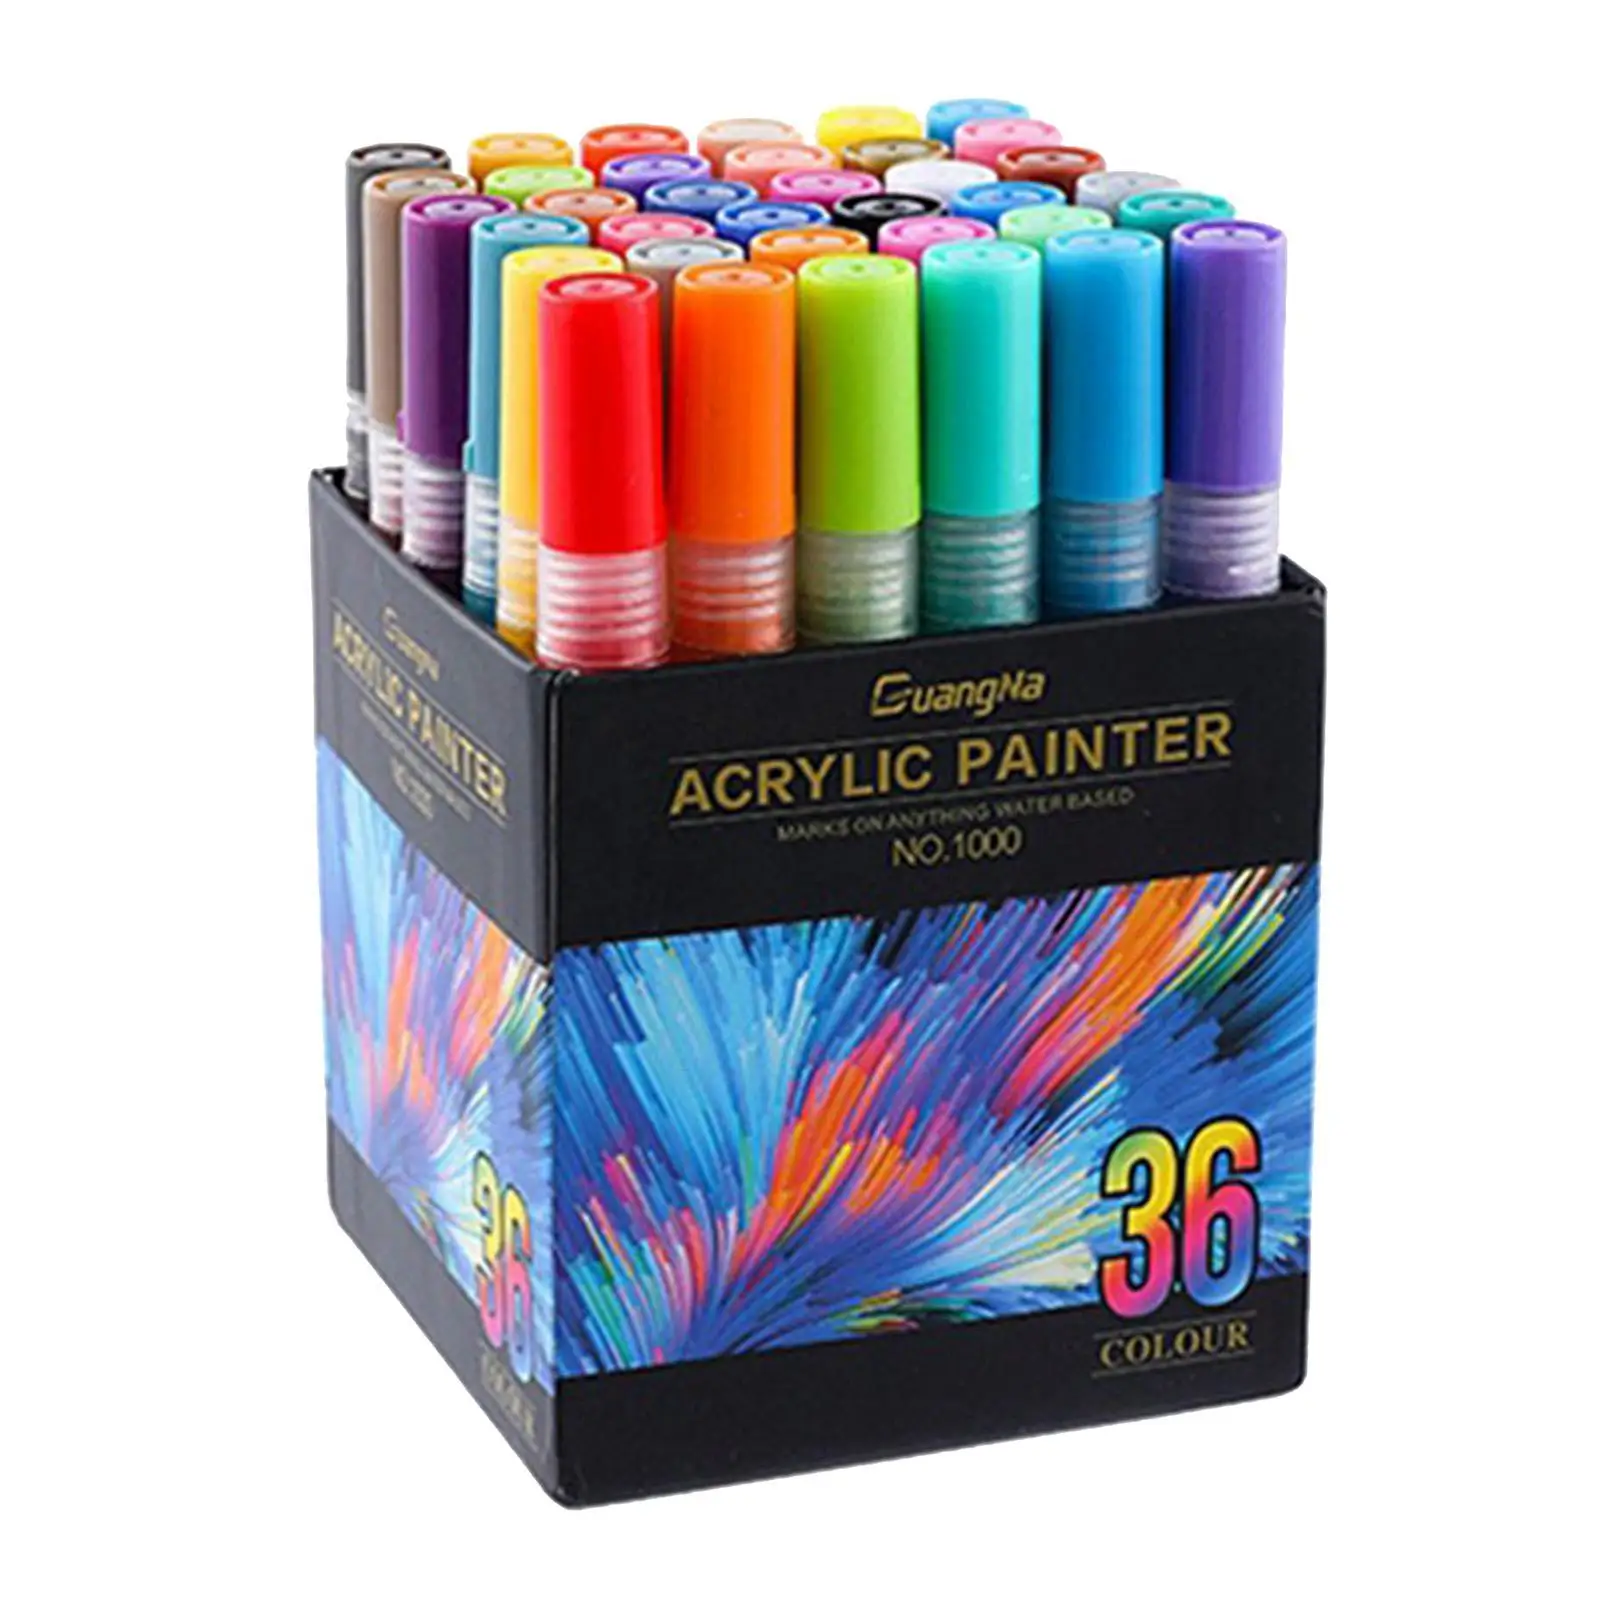 Paint Pens for Rock Painting,Wood, Canvas,  Ornament Crafts Kids Adults Greeting Cards Making Supplies Acrylic Paint Pens  s